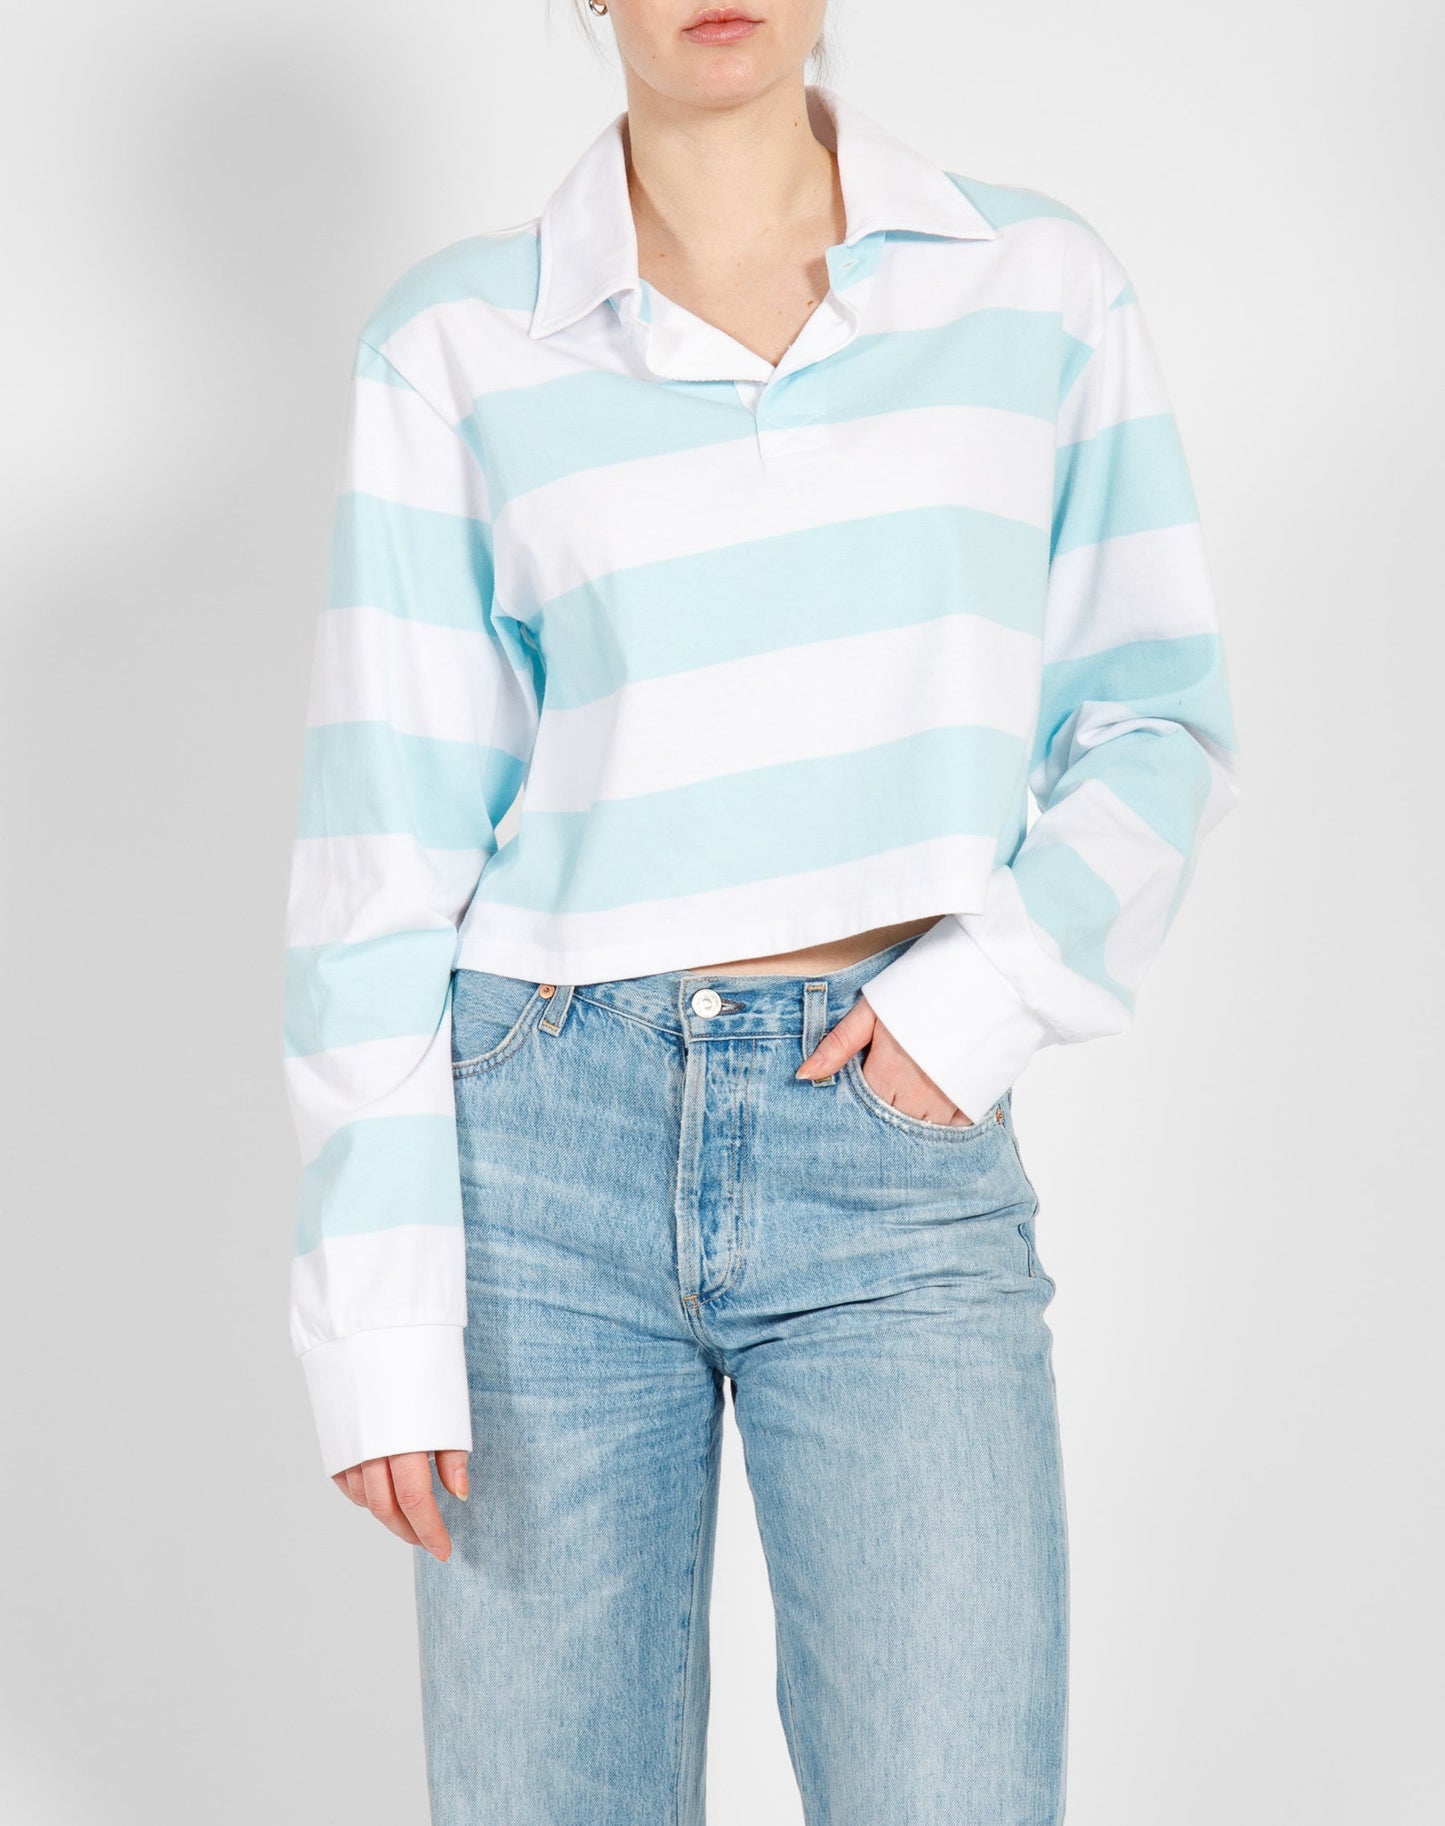 Brunette The Label- Cropped Rugby Shirt White & Baby Blue